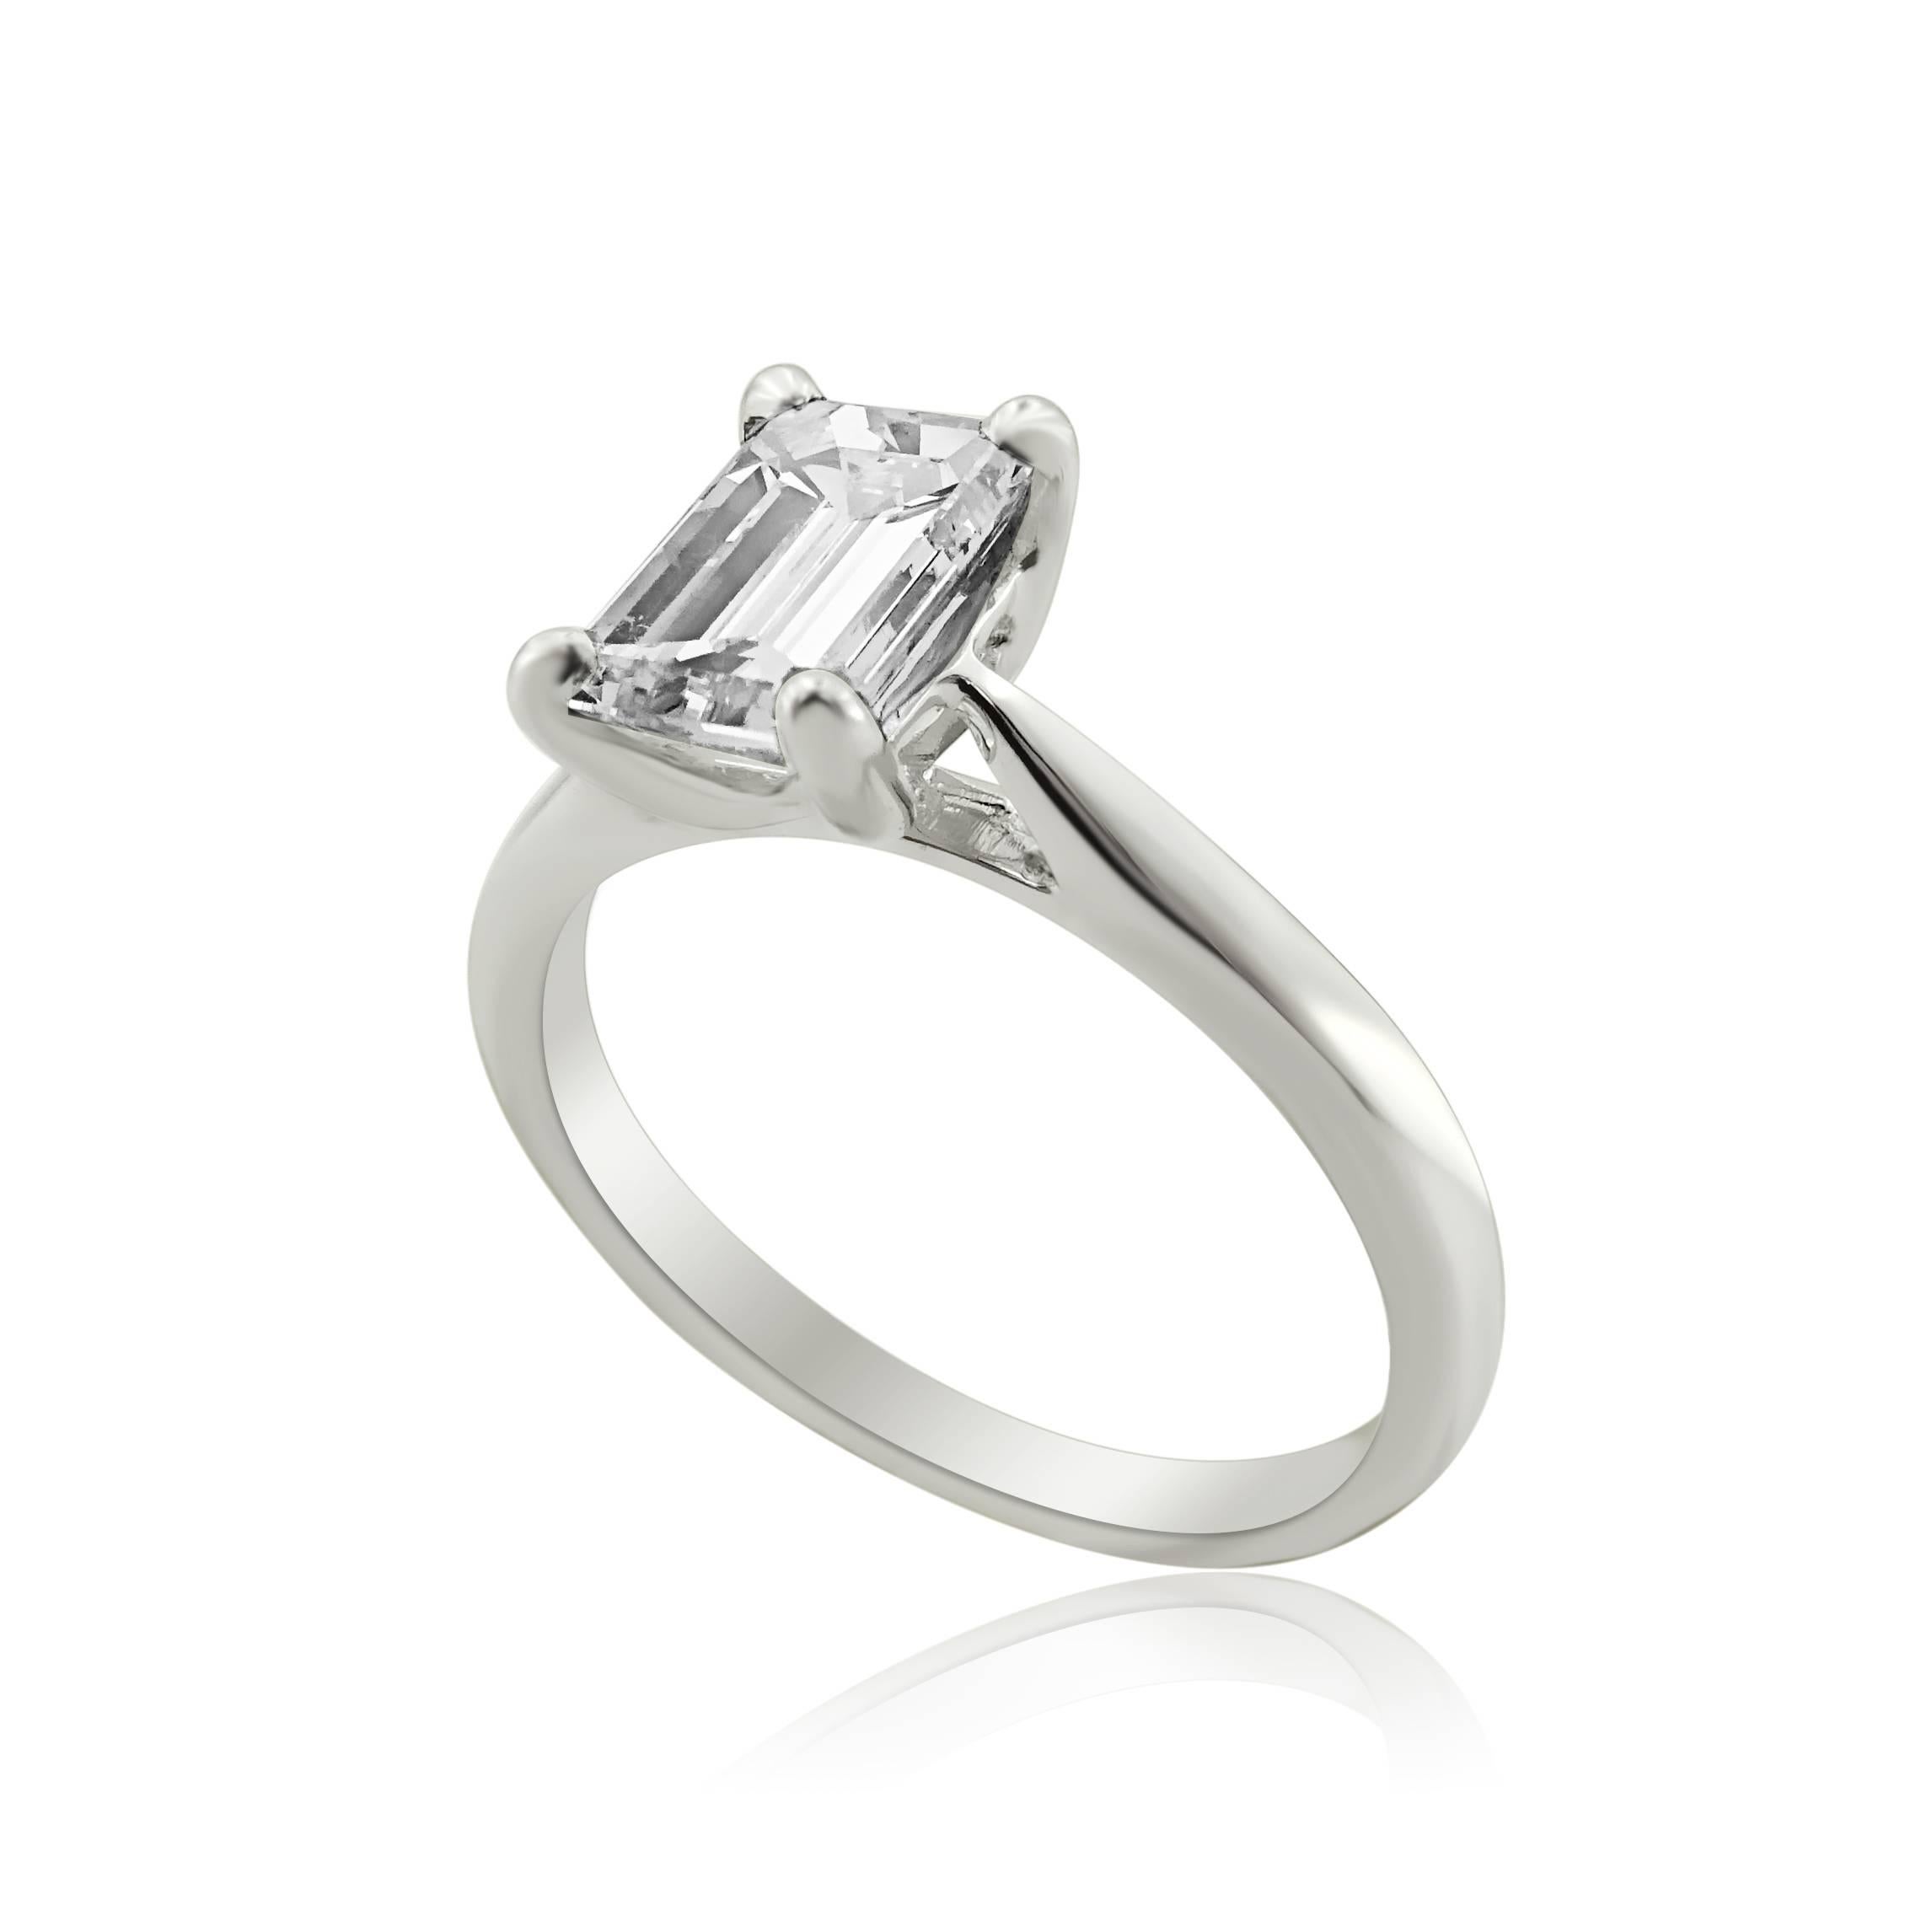 PLATINUM EMERALD CUT ENGAGEMENT RING - 1.27 CT

Emerald cut diamond weight: 1.27 ct
Color: D
Clarity: VVS2

Total ring weight: 4.32 grams


GIA Certified

